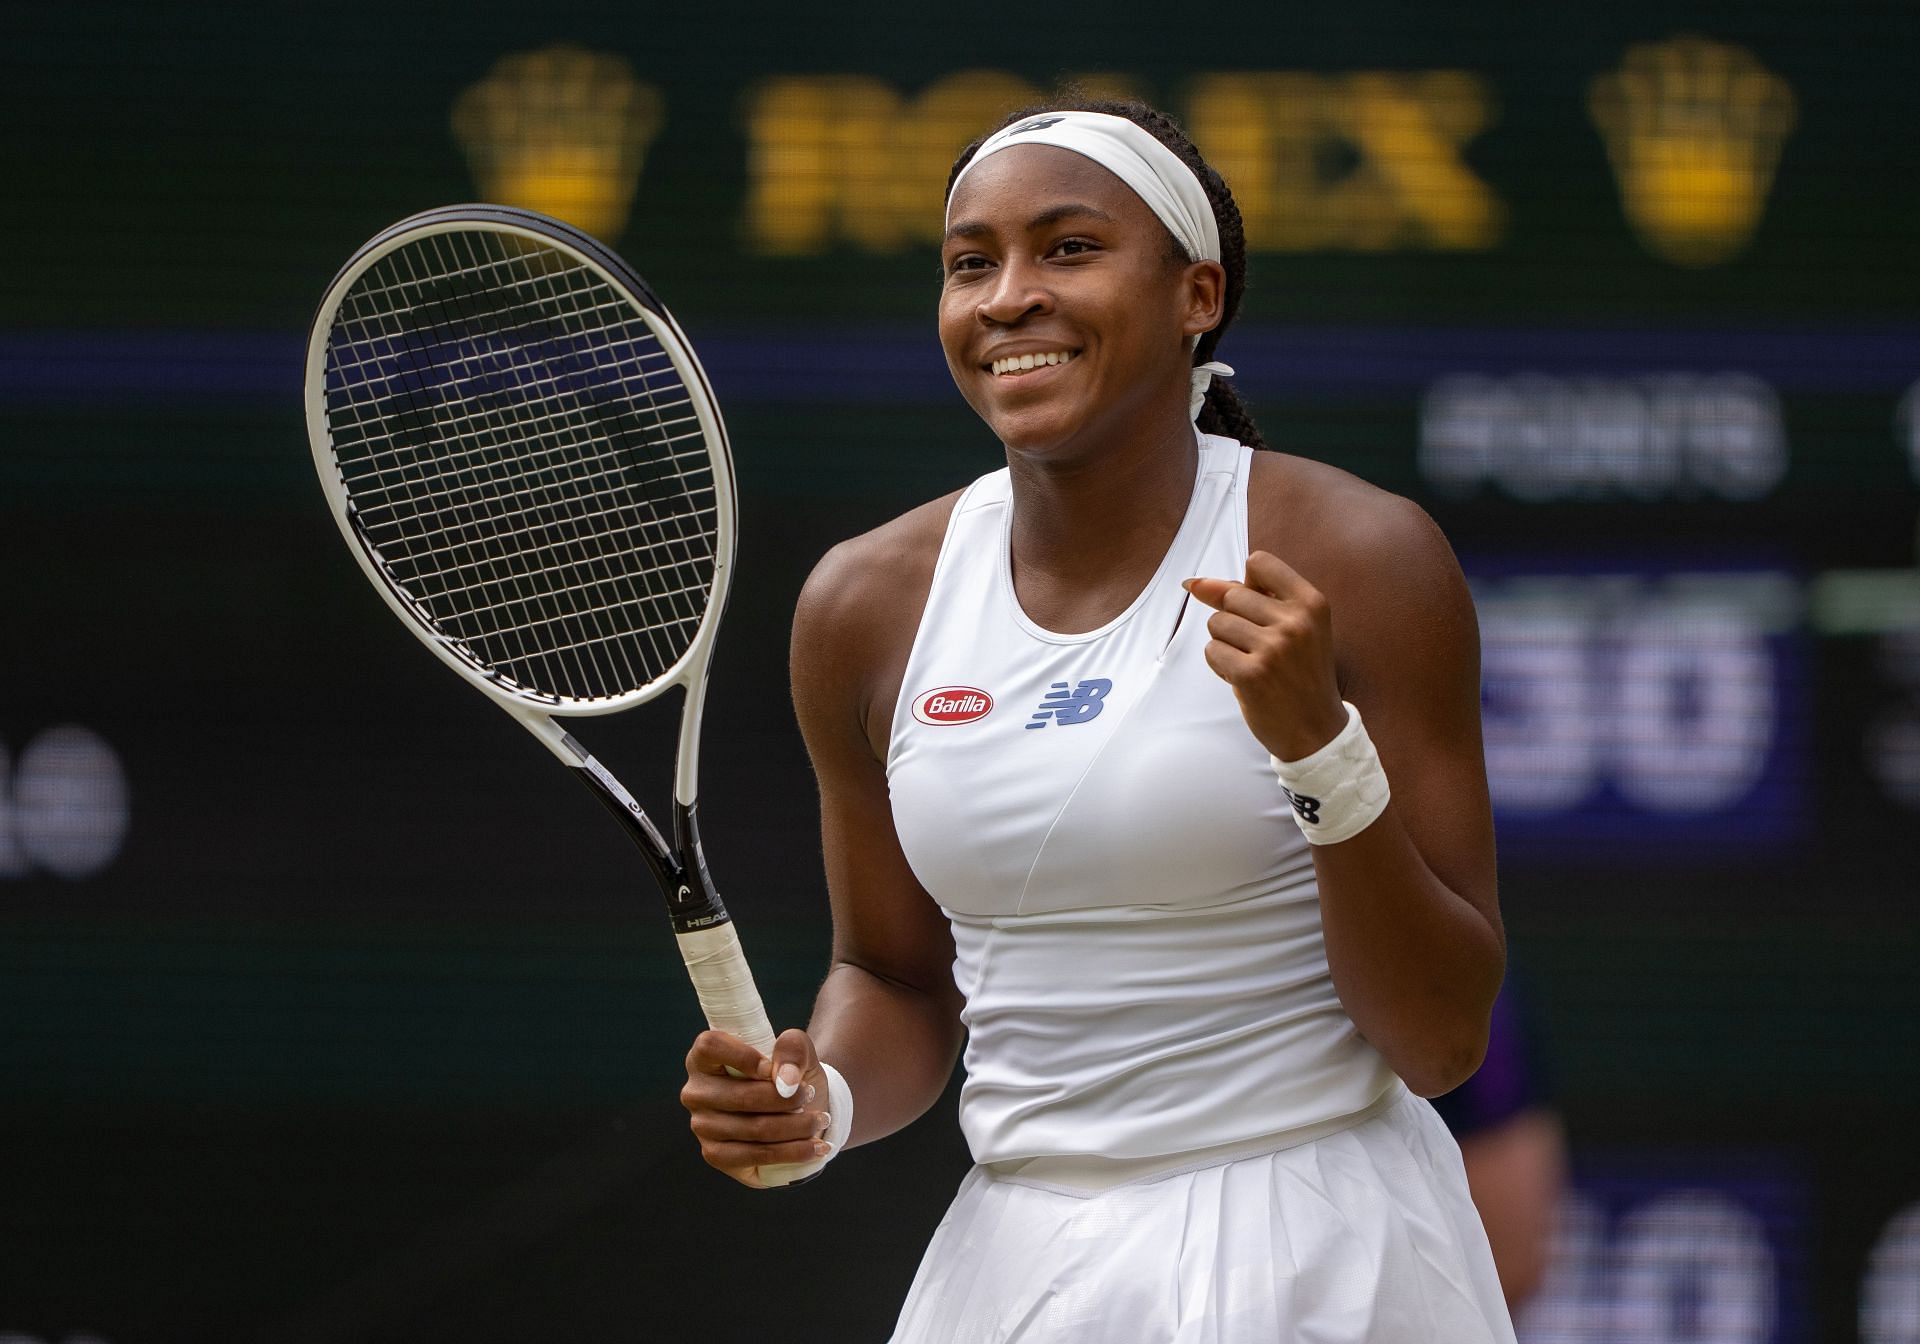 Coco Gauff will look to bring her good form to the Wimbledon Championships